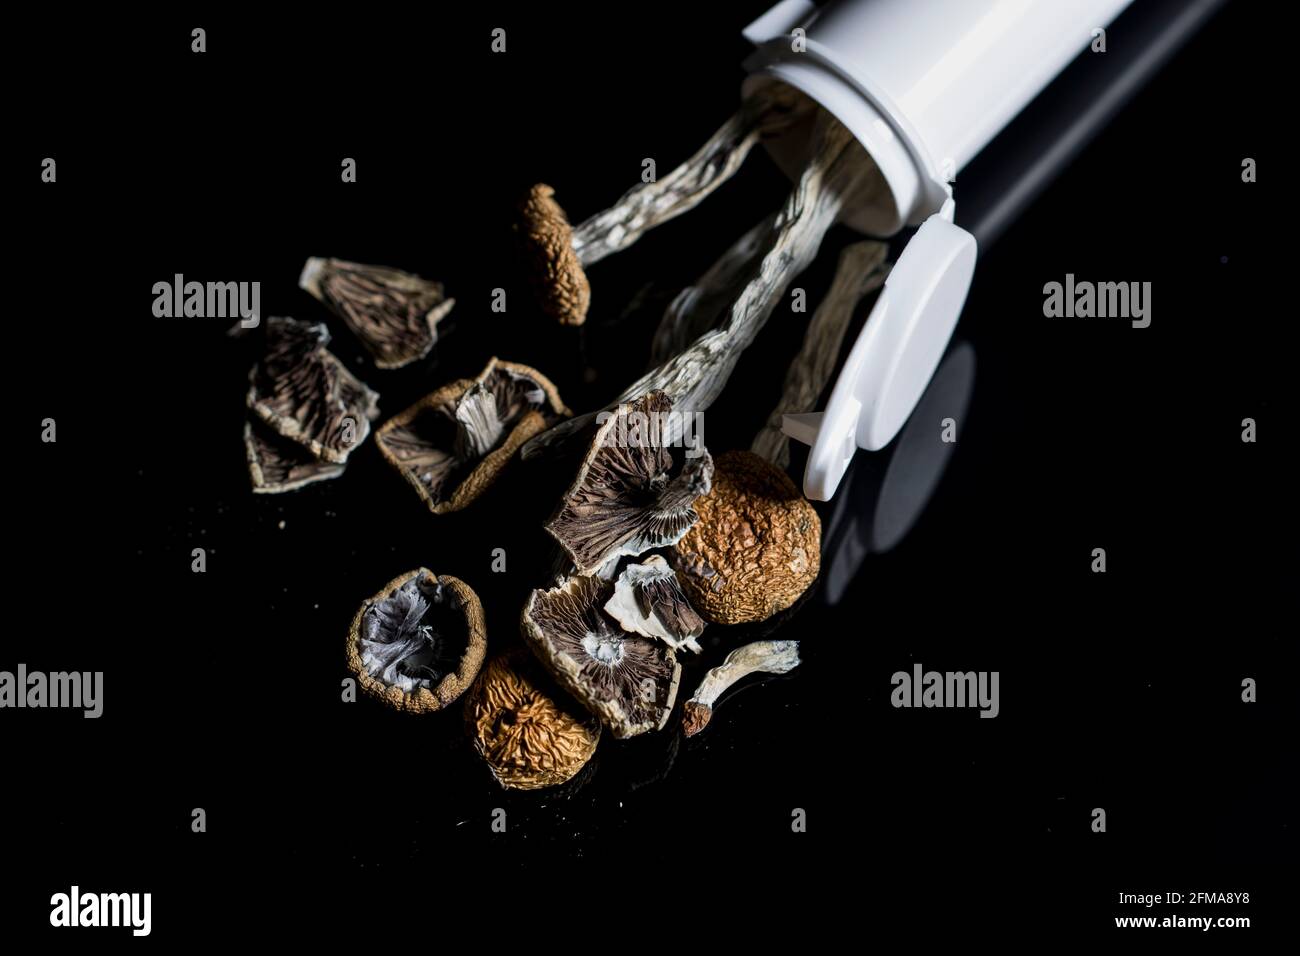 Close up magic mushrooms on black background. Modern alternative medicine used to treat mental health disorders and end of life distress. Stock Photo